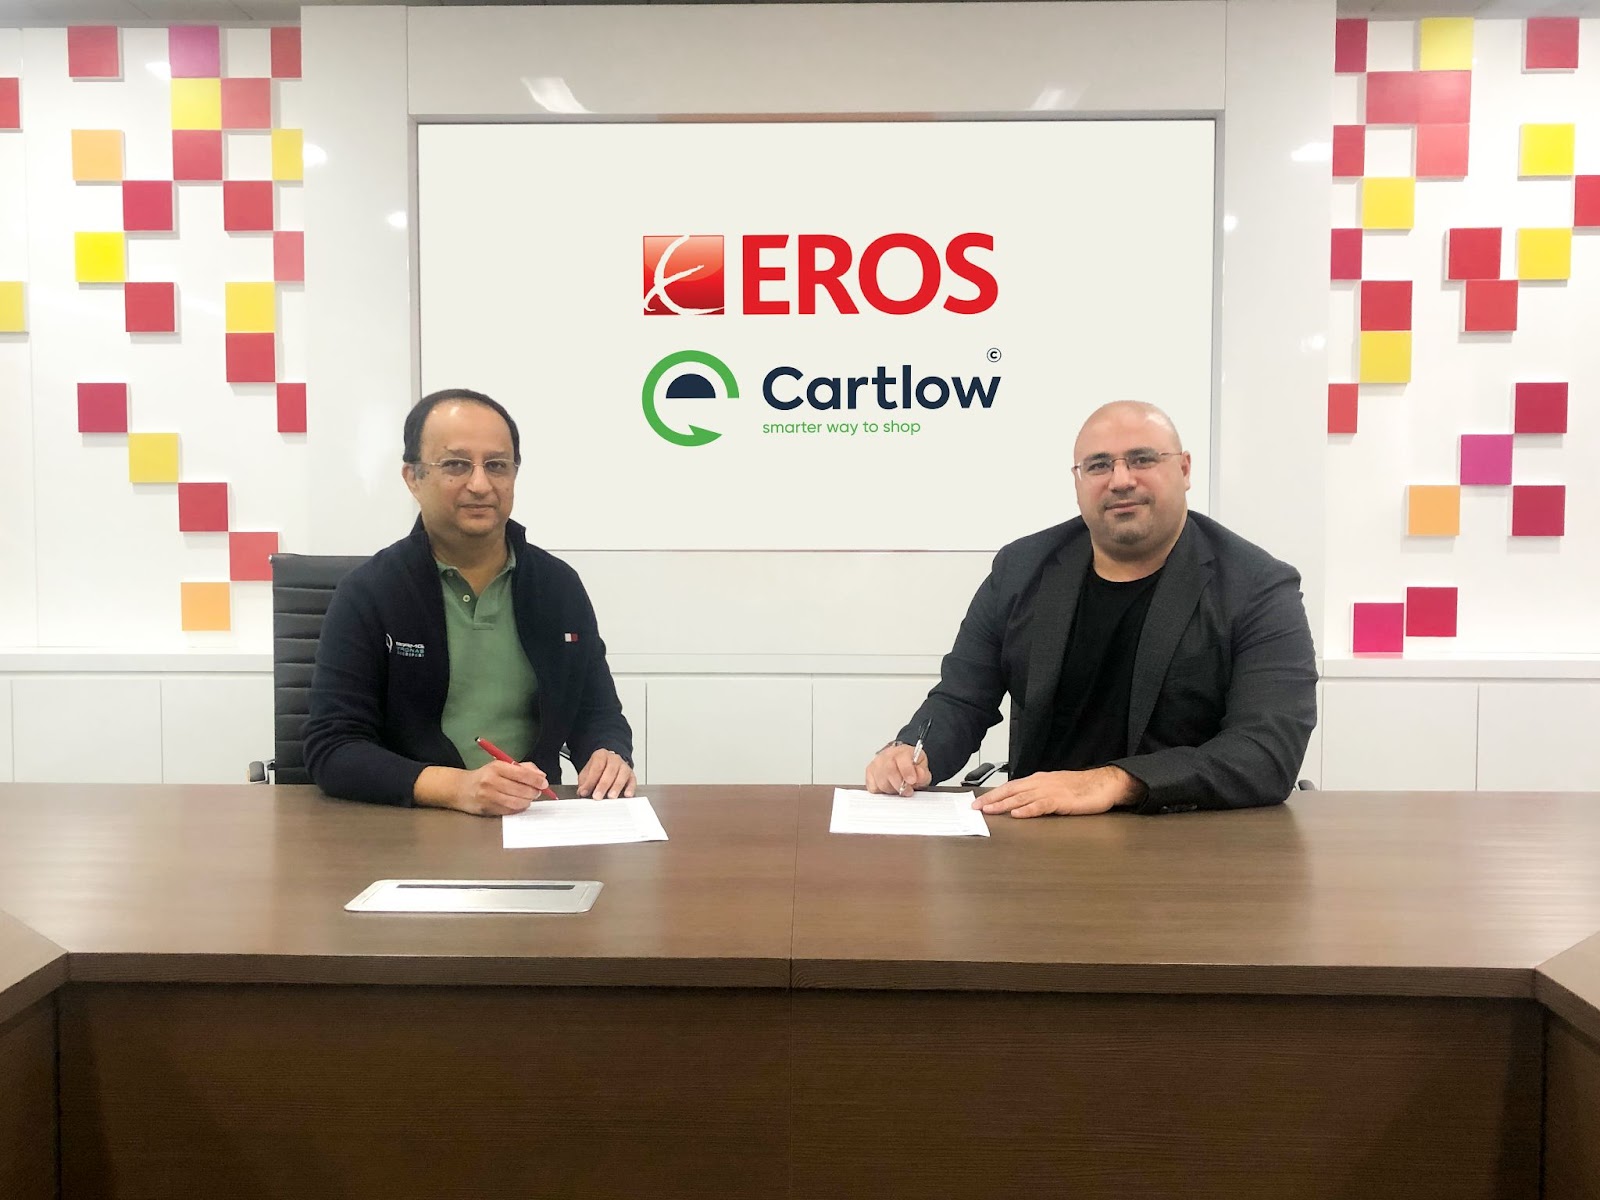 The UAE’s Leading Reverse Logistics Platform, Cartlow, Partners With Eros, The Trusted Retailer And Distributor For Consumer Electronics To Empower Digital De-Carbonization.